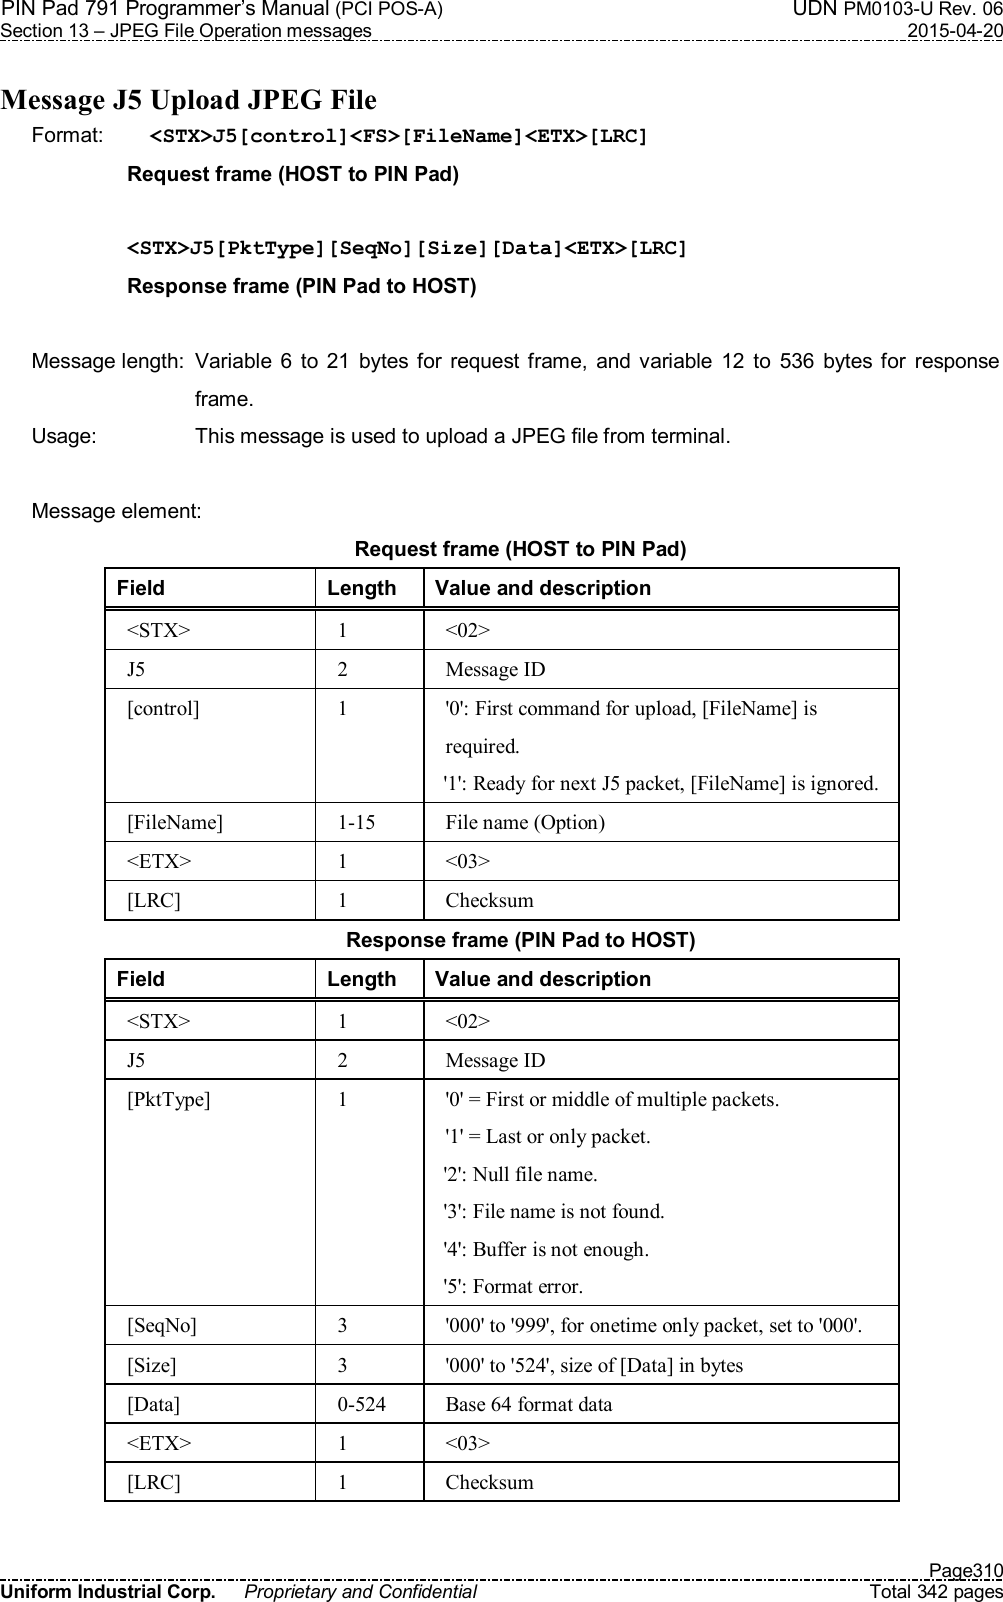 PIN Pad 791 Programmer’s Manual (PCI POS-A)  UDN PM0103-U Rev. 06 Section 13 – JPEG File Operation messages  2015-04-20   Page310 Uniform Industrial Corp.  Proprietary and Confidential  Total 342 pages  Message J5 Upload JPEG File Format:  &lt;STX&gt;J5[control]&lt;FS&gt;[FileName]&lt;ETX&gt;[LRC] Request frame (HOST to PIN Pad)  &lt;STX&gt;J5[PktType][SeqNo][Size][Data]&lt;ETX&gt;[LRC] Response frame (PIN Pad to HOST)  Message length:  Variable  6  to  21  bytes for  request  frame,  and variable  12  to  536  bytes for  response frame. Usage:  This message is used to upload a JPEG file from terminal.  Message element: Request frame (HOST to PIN Pad) Field  Length  Value and description &lt;STX&gt;  1  &lt;02&gt; J5  2  Message ID [control]  1  &apos;0&apos;: First command for upload, [FileName] is required. &apos;1&apos;: Ready for next J5 packet, [FileName] is ignored. [FileName]  1-15  File name (Option) &lt;ETX&gt;  1  &lt;03&gt; [LRC]  1  Checksum Response frame (PIN Pad to HOST) Field  Length  Value and description &lt;STX&gt;  1  &lt;02&gt; J5  2  Message ID [PktType]  1  &apos;0&apos; = First or middle of multiple packets. &apos;1&apos; = Last or only packet. &apos;2&apos;: Null file name. &apos;3&apos;: File name is not found. &apos;4&apos;: Buffer is not enough. &apos;5&apos;: Format error. [SeqNo]  3  &apos;000&apos; to &apos;999&apos;, for onetime only packet, set to &apos;000&apos;. [Size]  3  &apos;000&apos; to &apos;524&apos;, size of [Data] in bytes [Data]  0-524  Base 64 format data &lt;ETX&gt;  1  &lt;03&gt; [LRC]  1  Checksum  